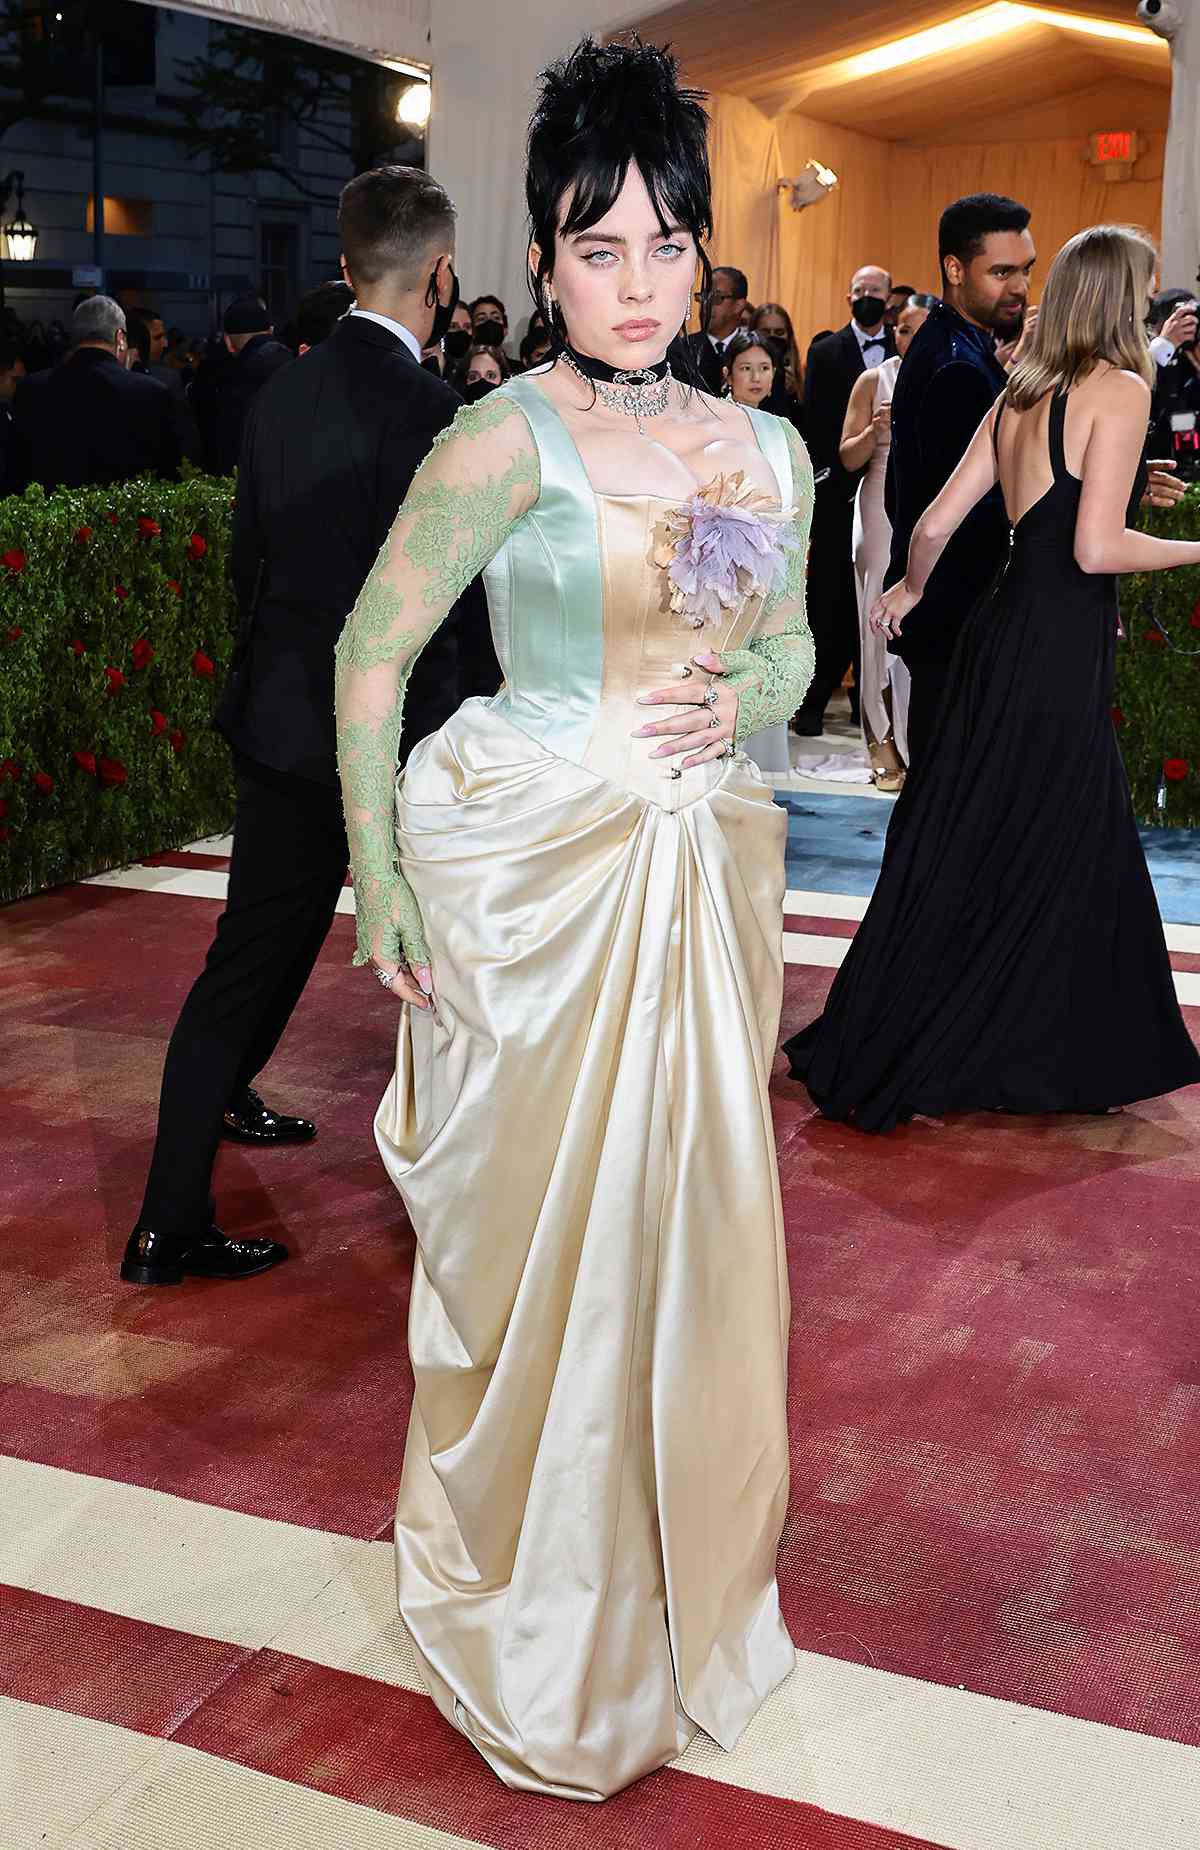 Billie Eilish Goes Goth Glam in an ‘Eco-Friendly’ Gucci Gown and Rocker-Chic Updo at 2022 Met Gala